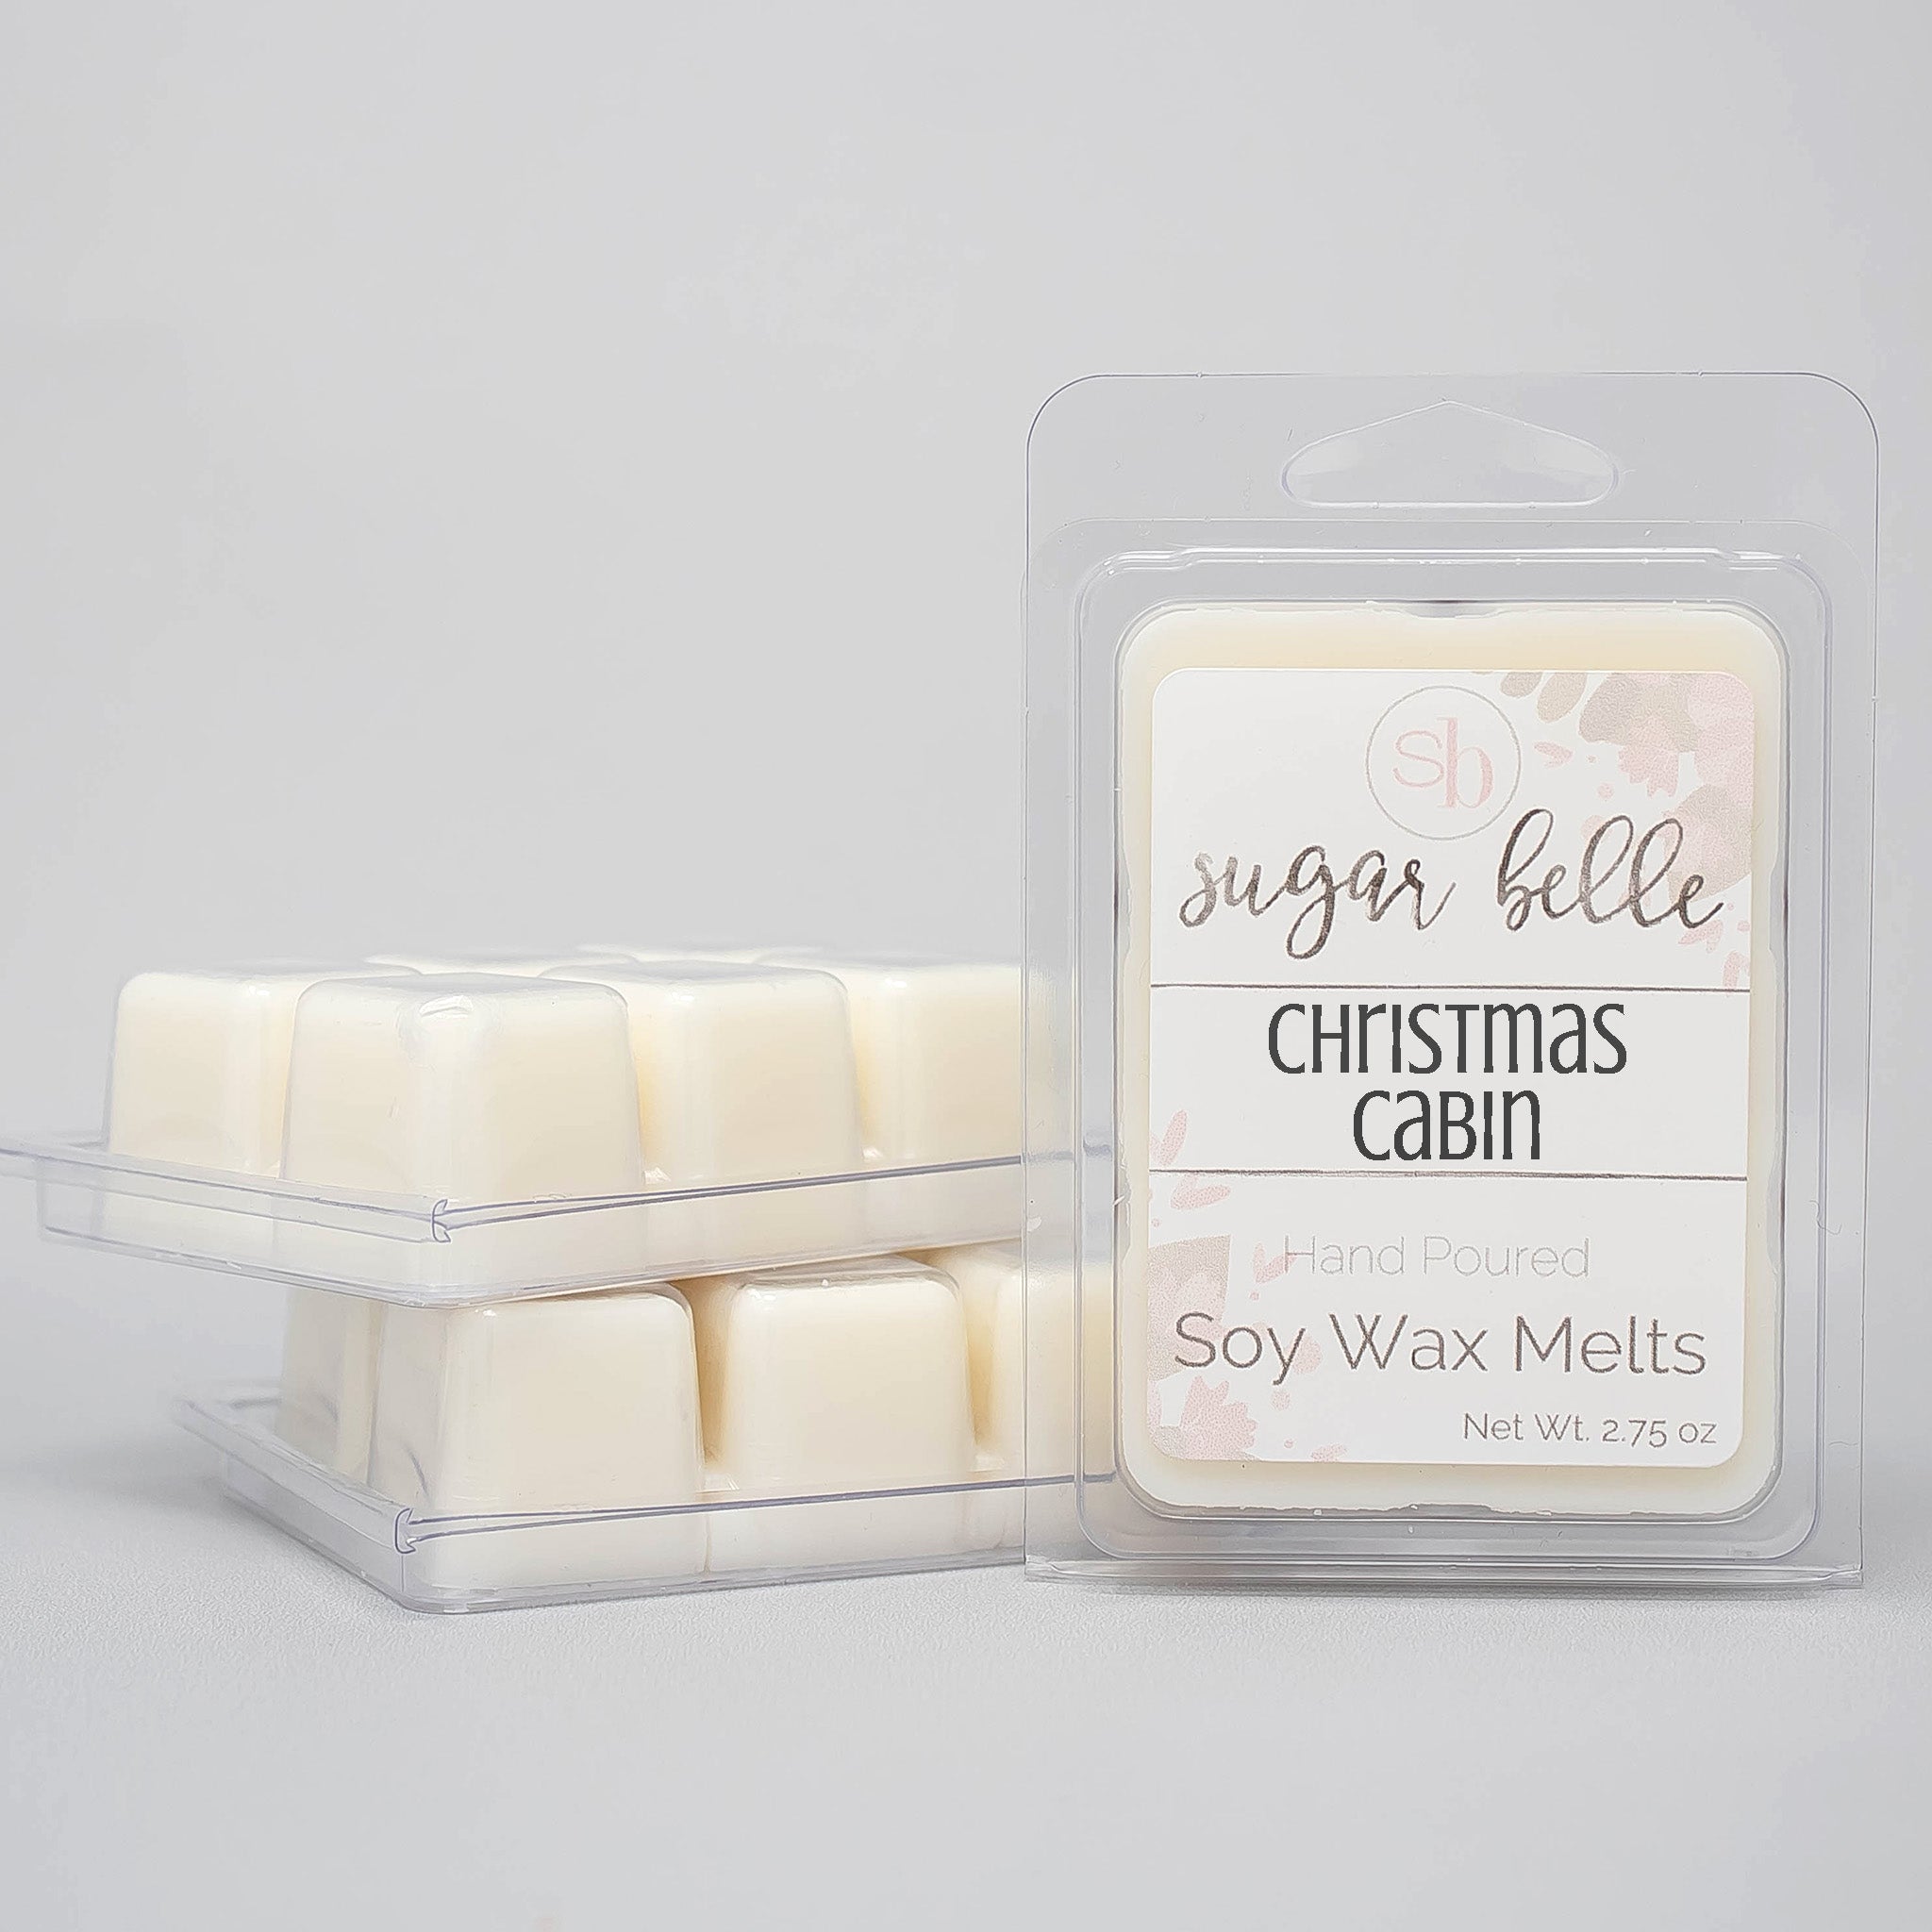  California Handcrafted Catalina Island Scented Soy Wax Melts :  Handmade Products